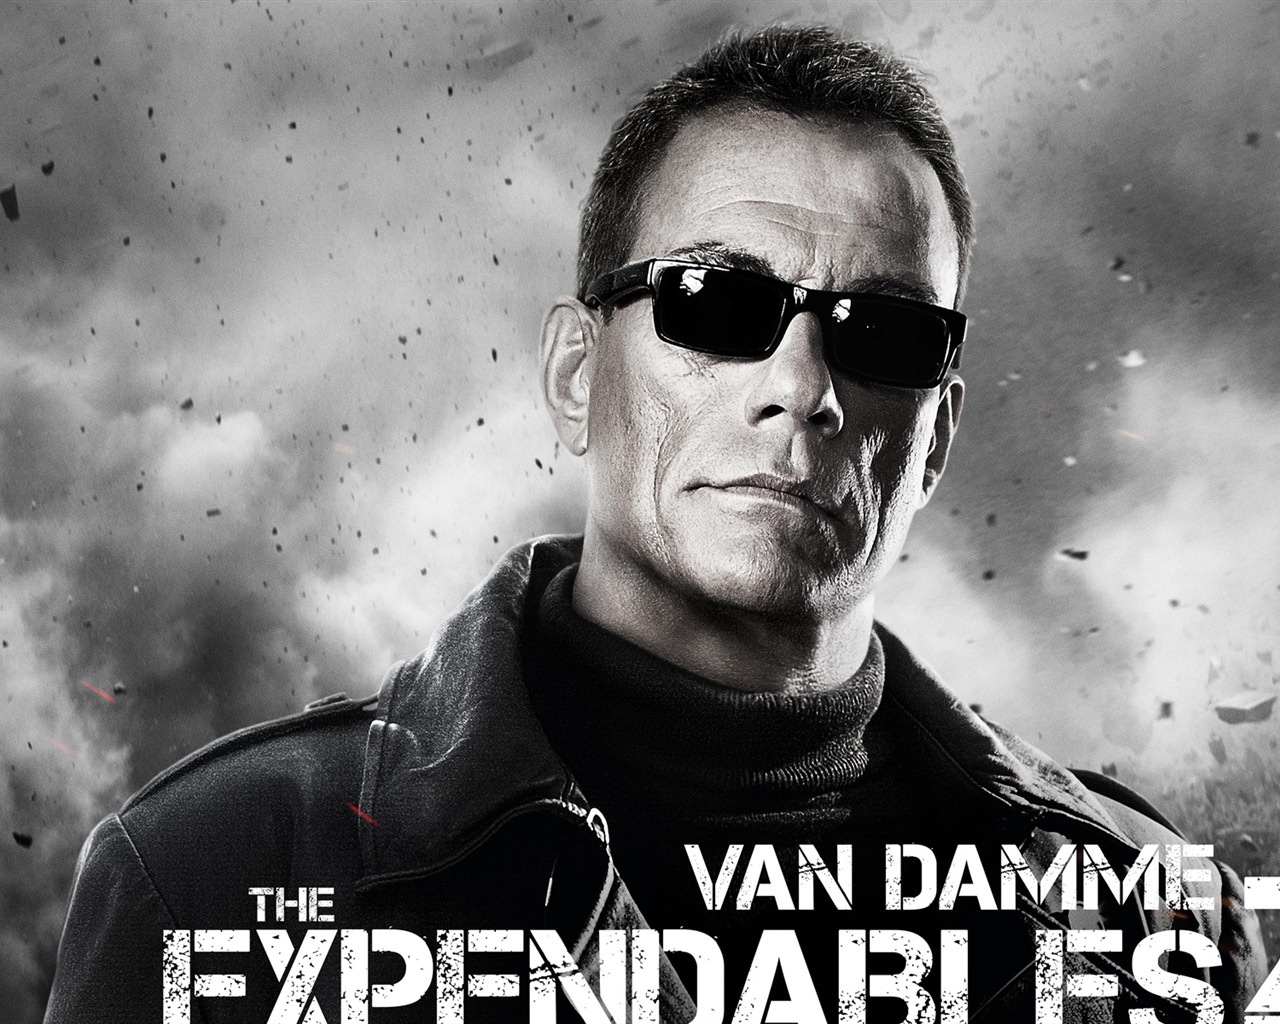 2012 The Expendables 2 敢死队2 高清壁纸6 - 1280x1024